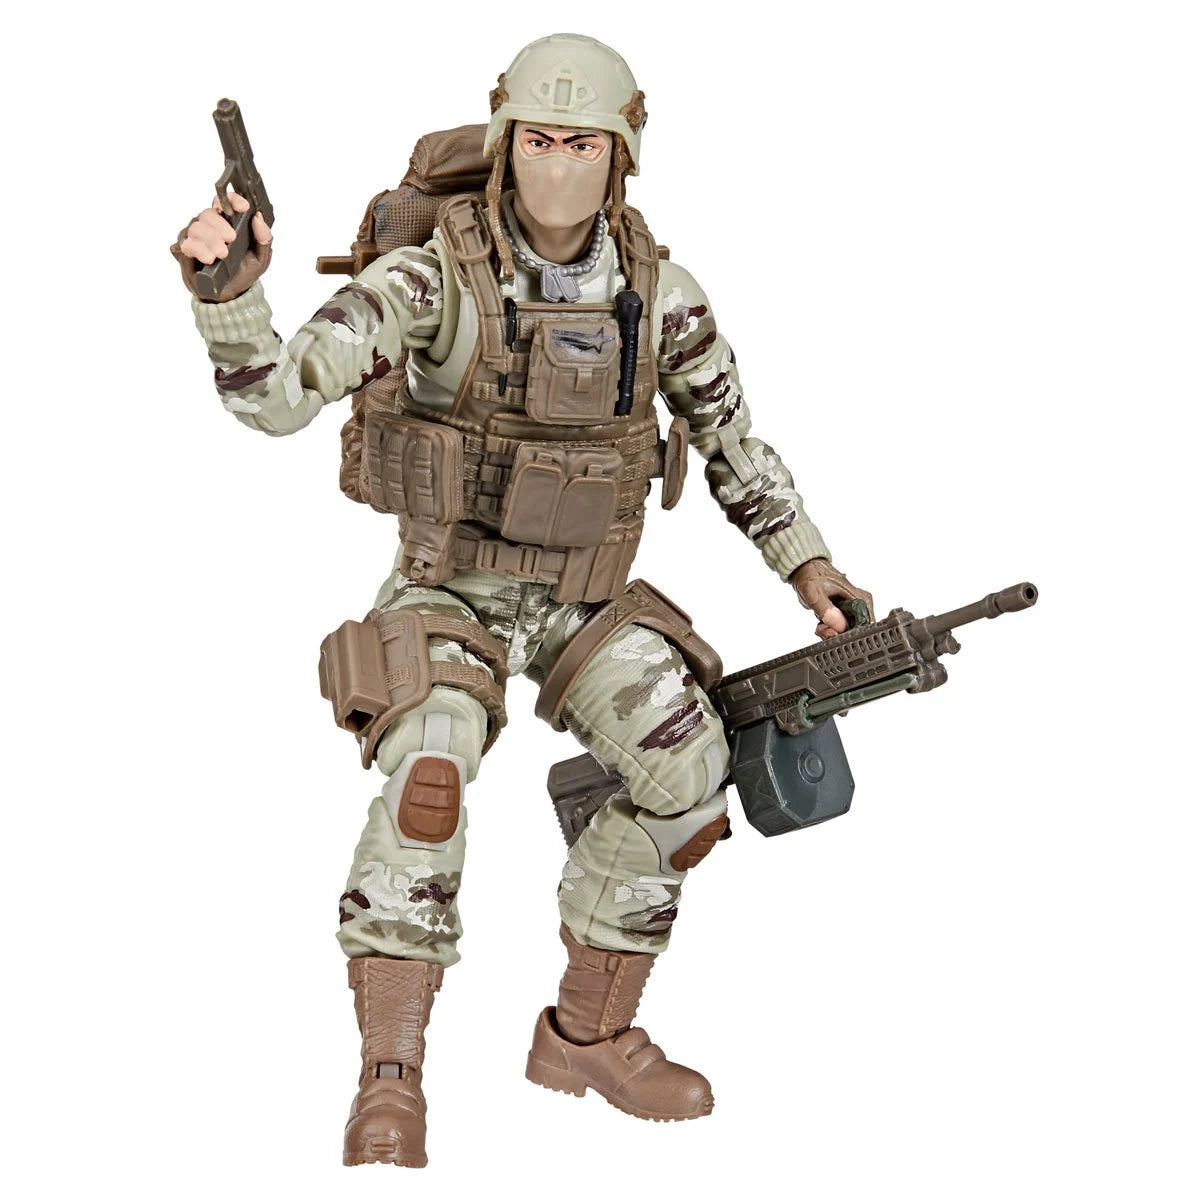 G.I. Joe Classified Series 60th Anniversary Action Soldier - Infantry Action Figure Toy